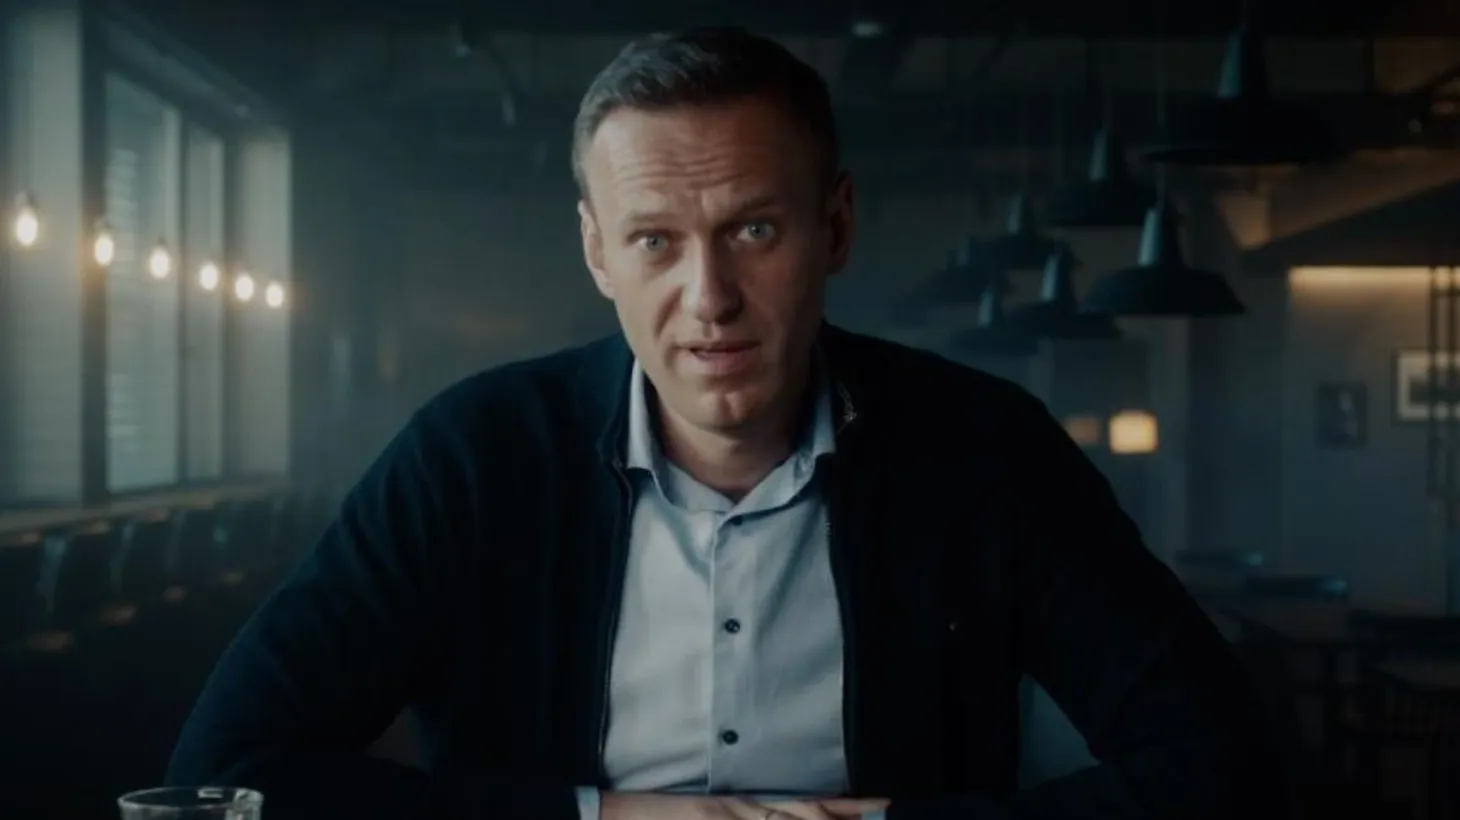 Alexei Navalny, Russian opposition leader, is interviewed in “Navalny.”